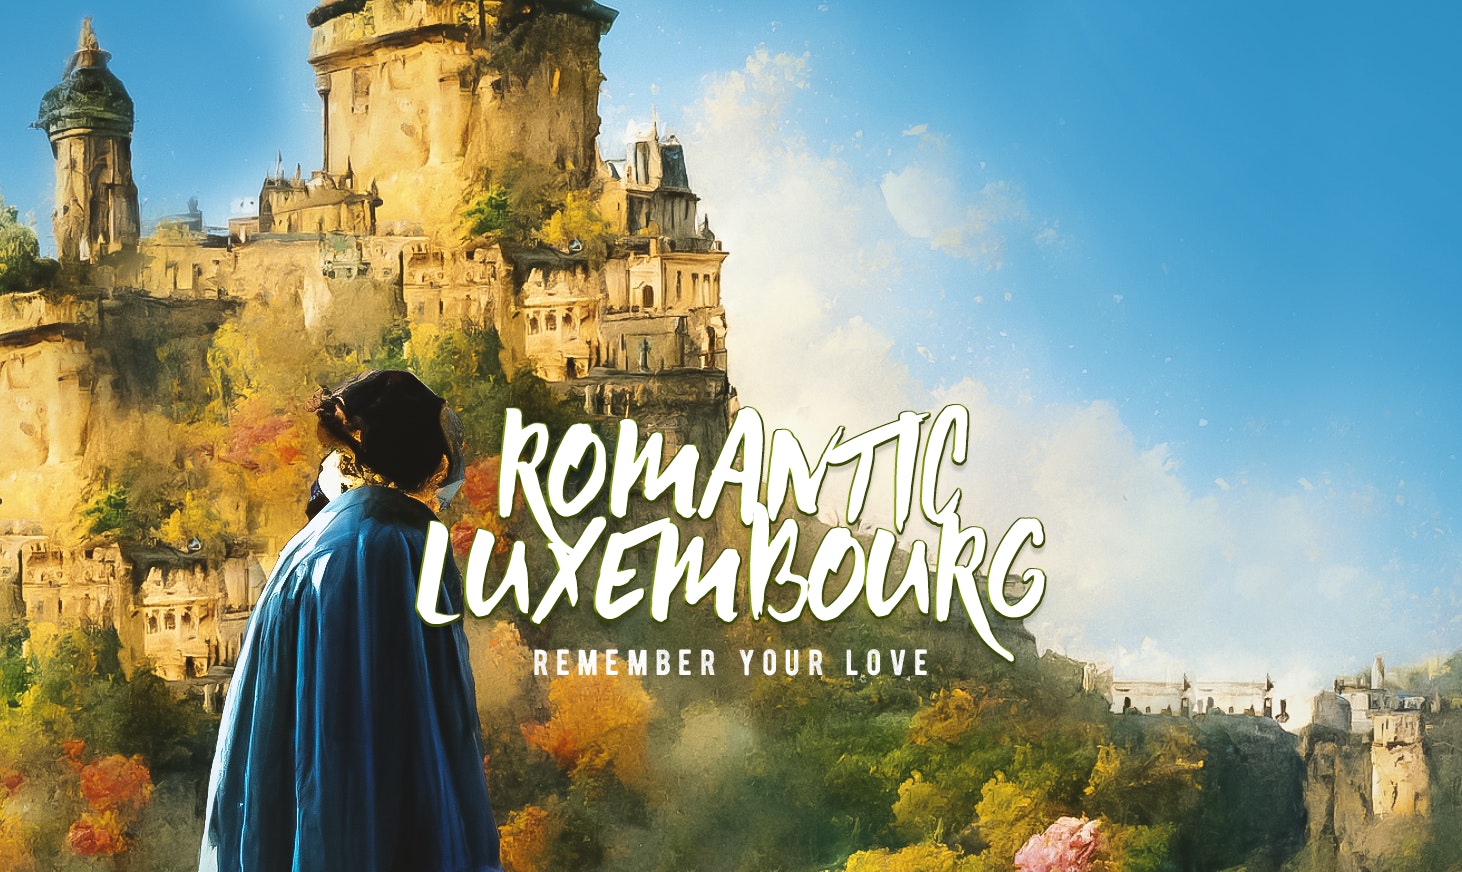 Romantic Luxembourg: Remember Your Love!